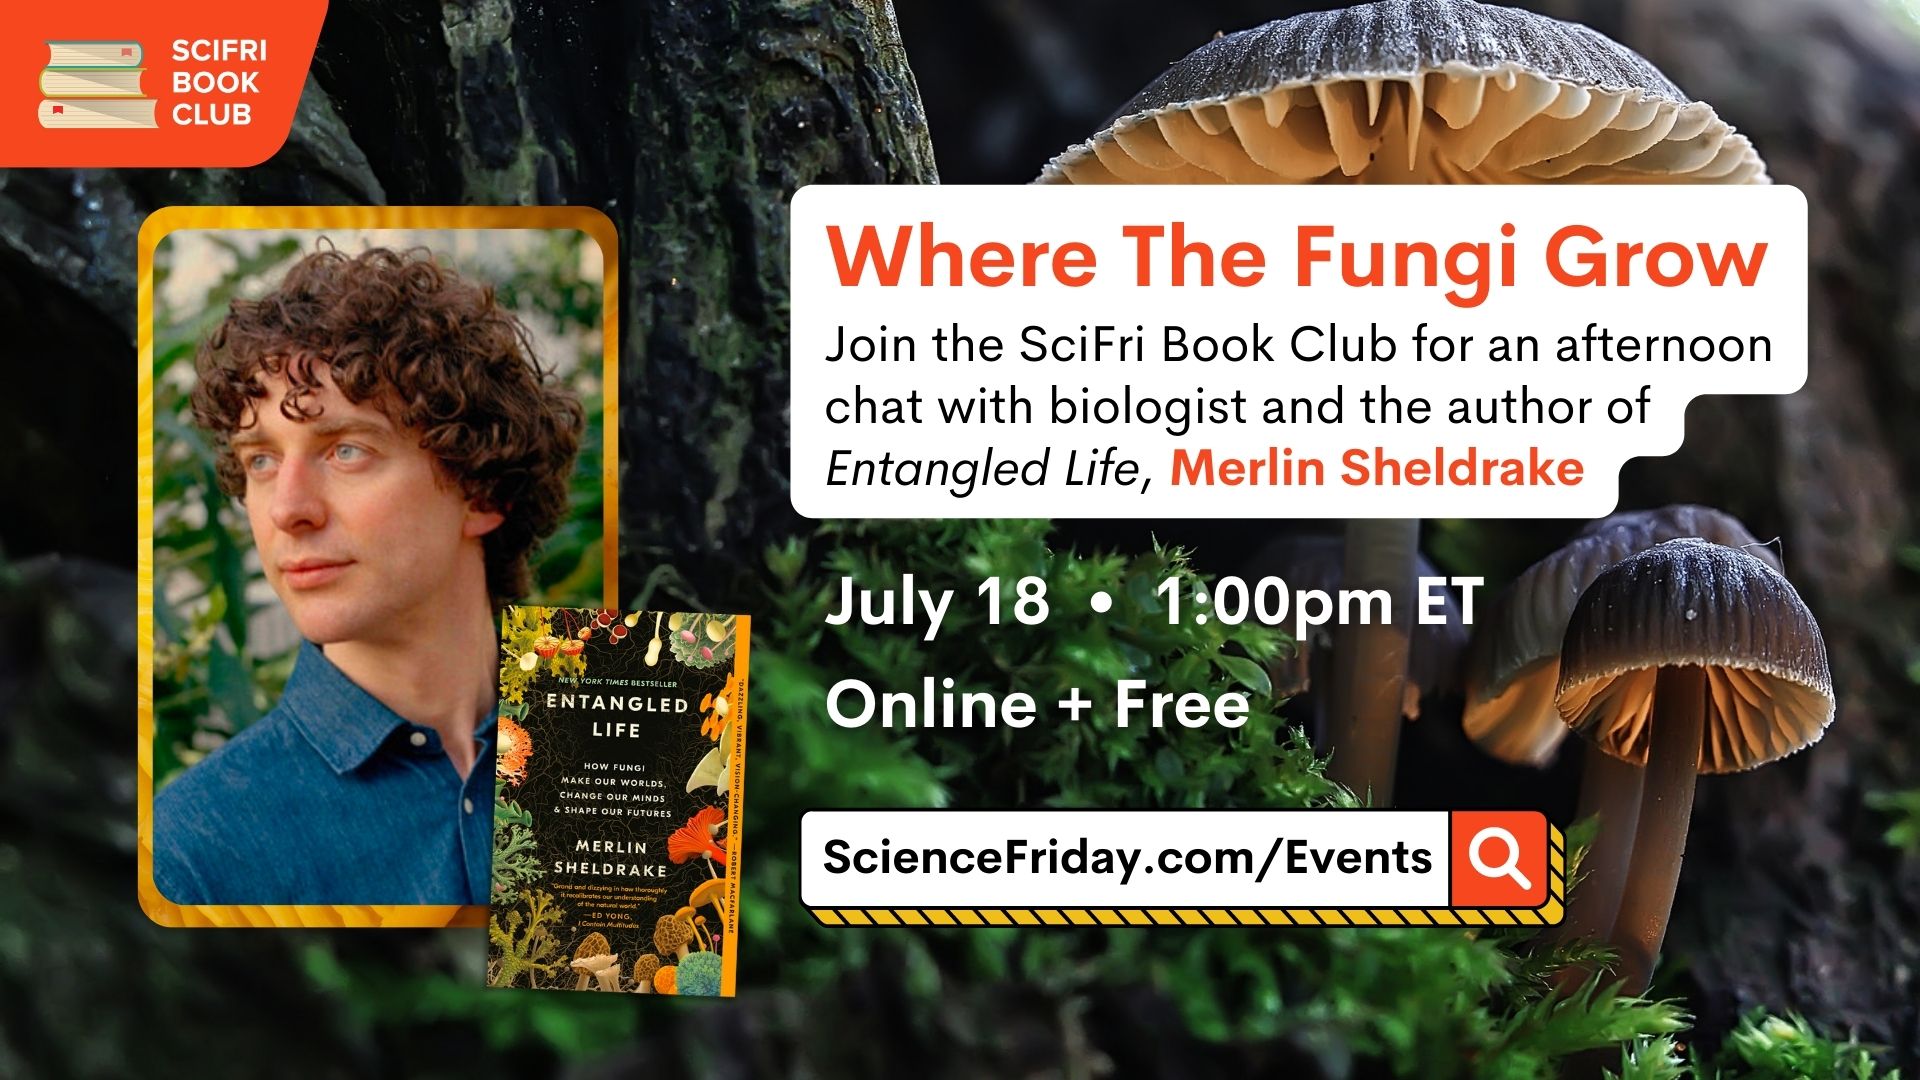 Event promotional image. In top left corner, SciFri Book Club logo, with event info below, which reads: Where The Fungi Grow. Join the SciFri Book Club for an afternoon chat with biologist and the author of 'Entangled Life', Merlin Sheldrake. July 18, 1:00pm ET, Online + Free, ScienceFriday.com/Events. To the right of the frame is a picture of ENTANGLED LIFE book cover and a headshot of author Merlin Sheldrake, a white man with curly brown hair